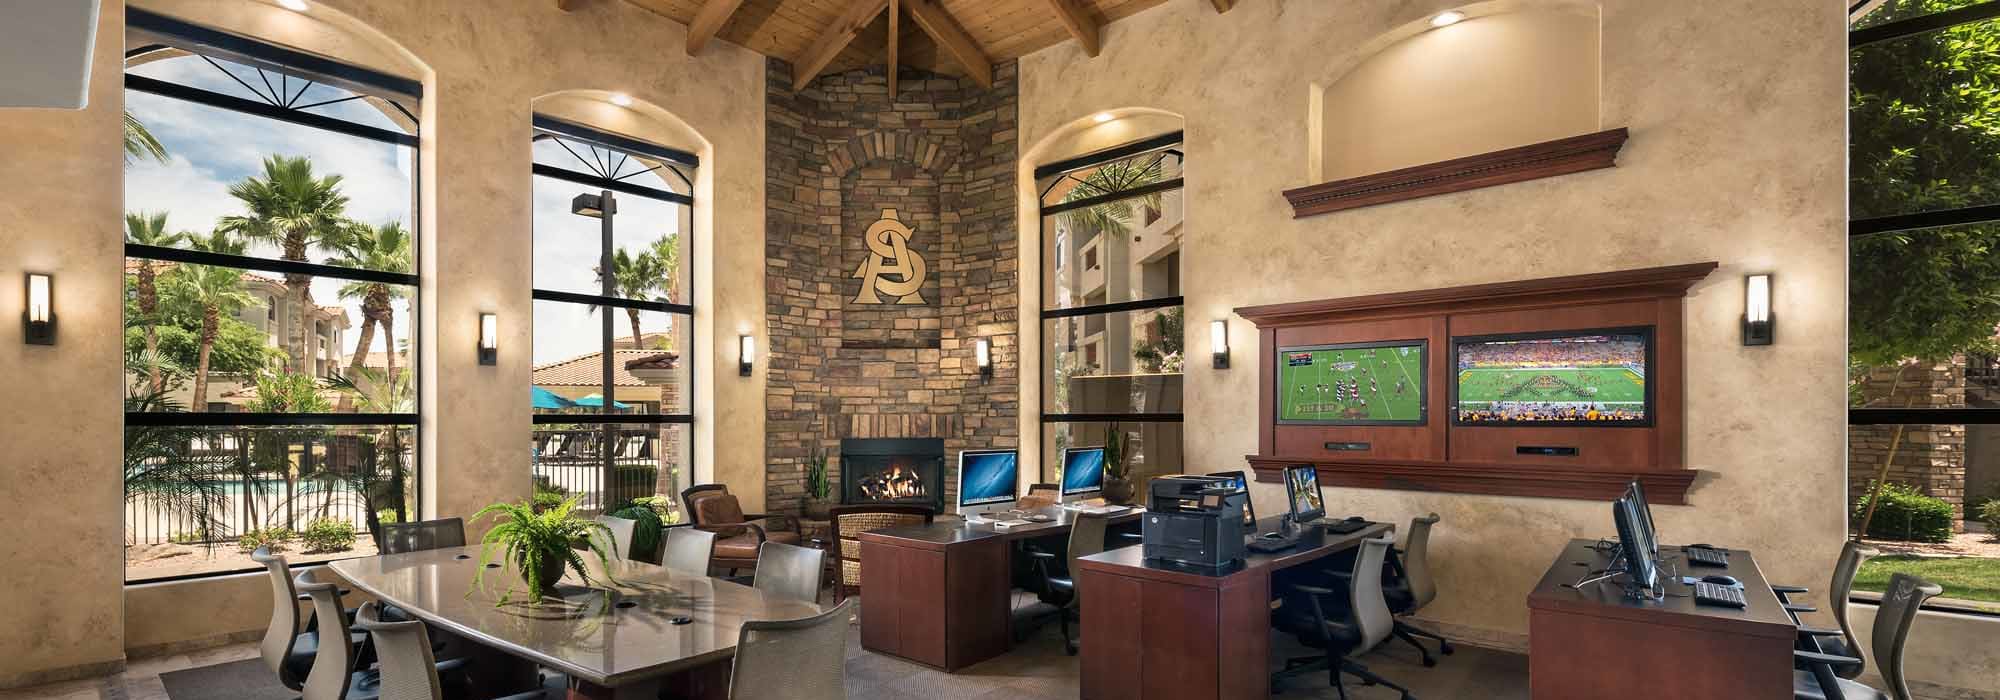 Cyber Cafe and clubhouse at San Marbeya in Tempe, Arizona